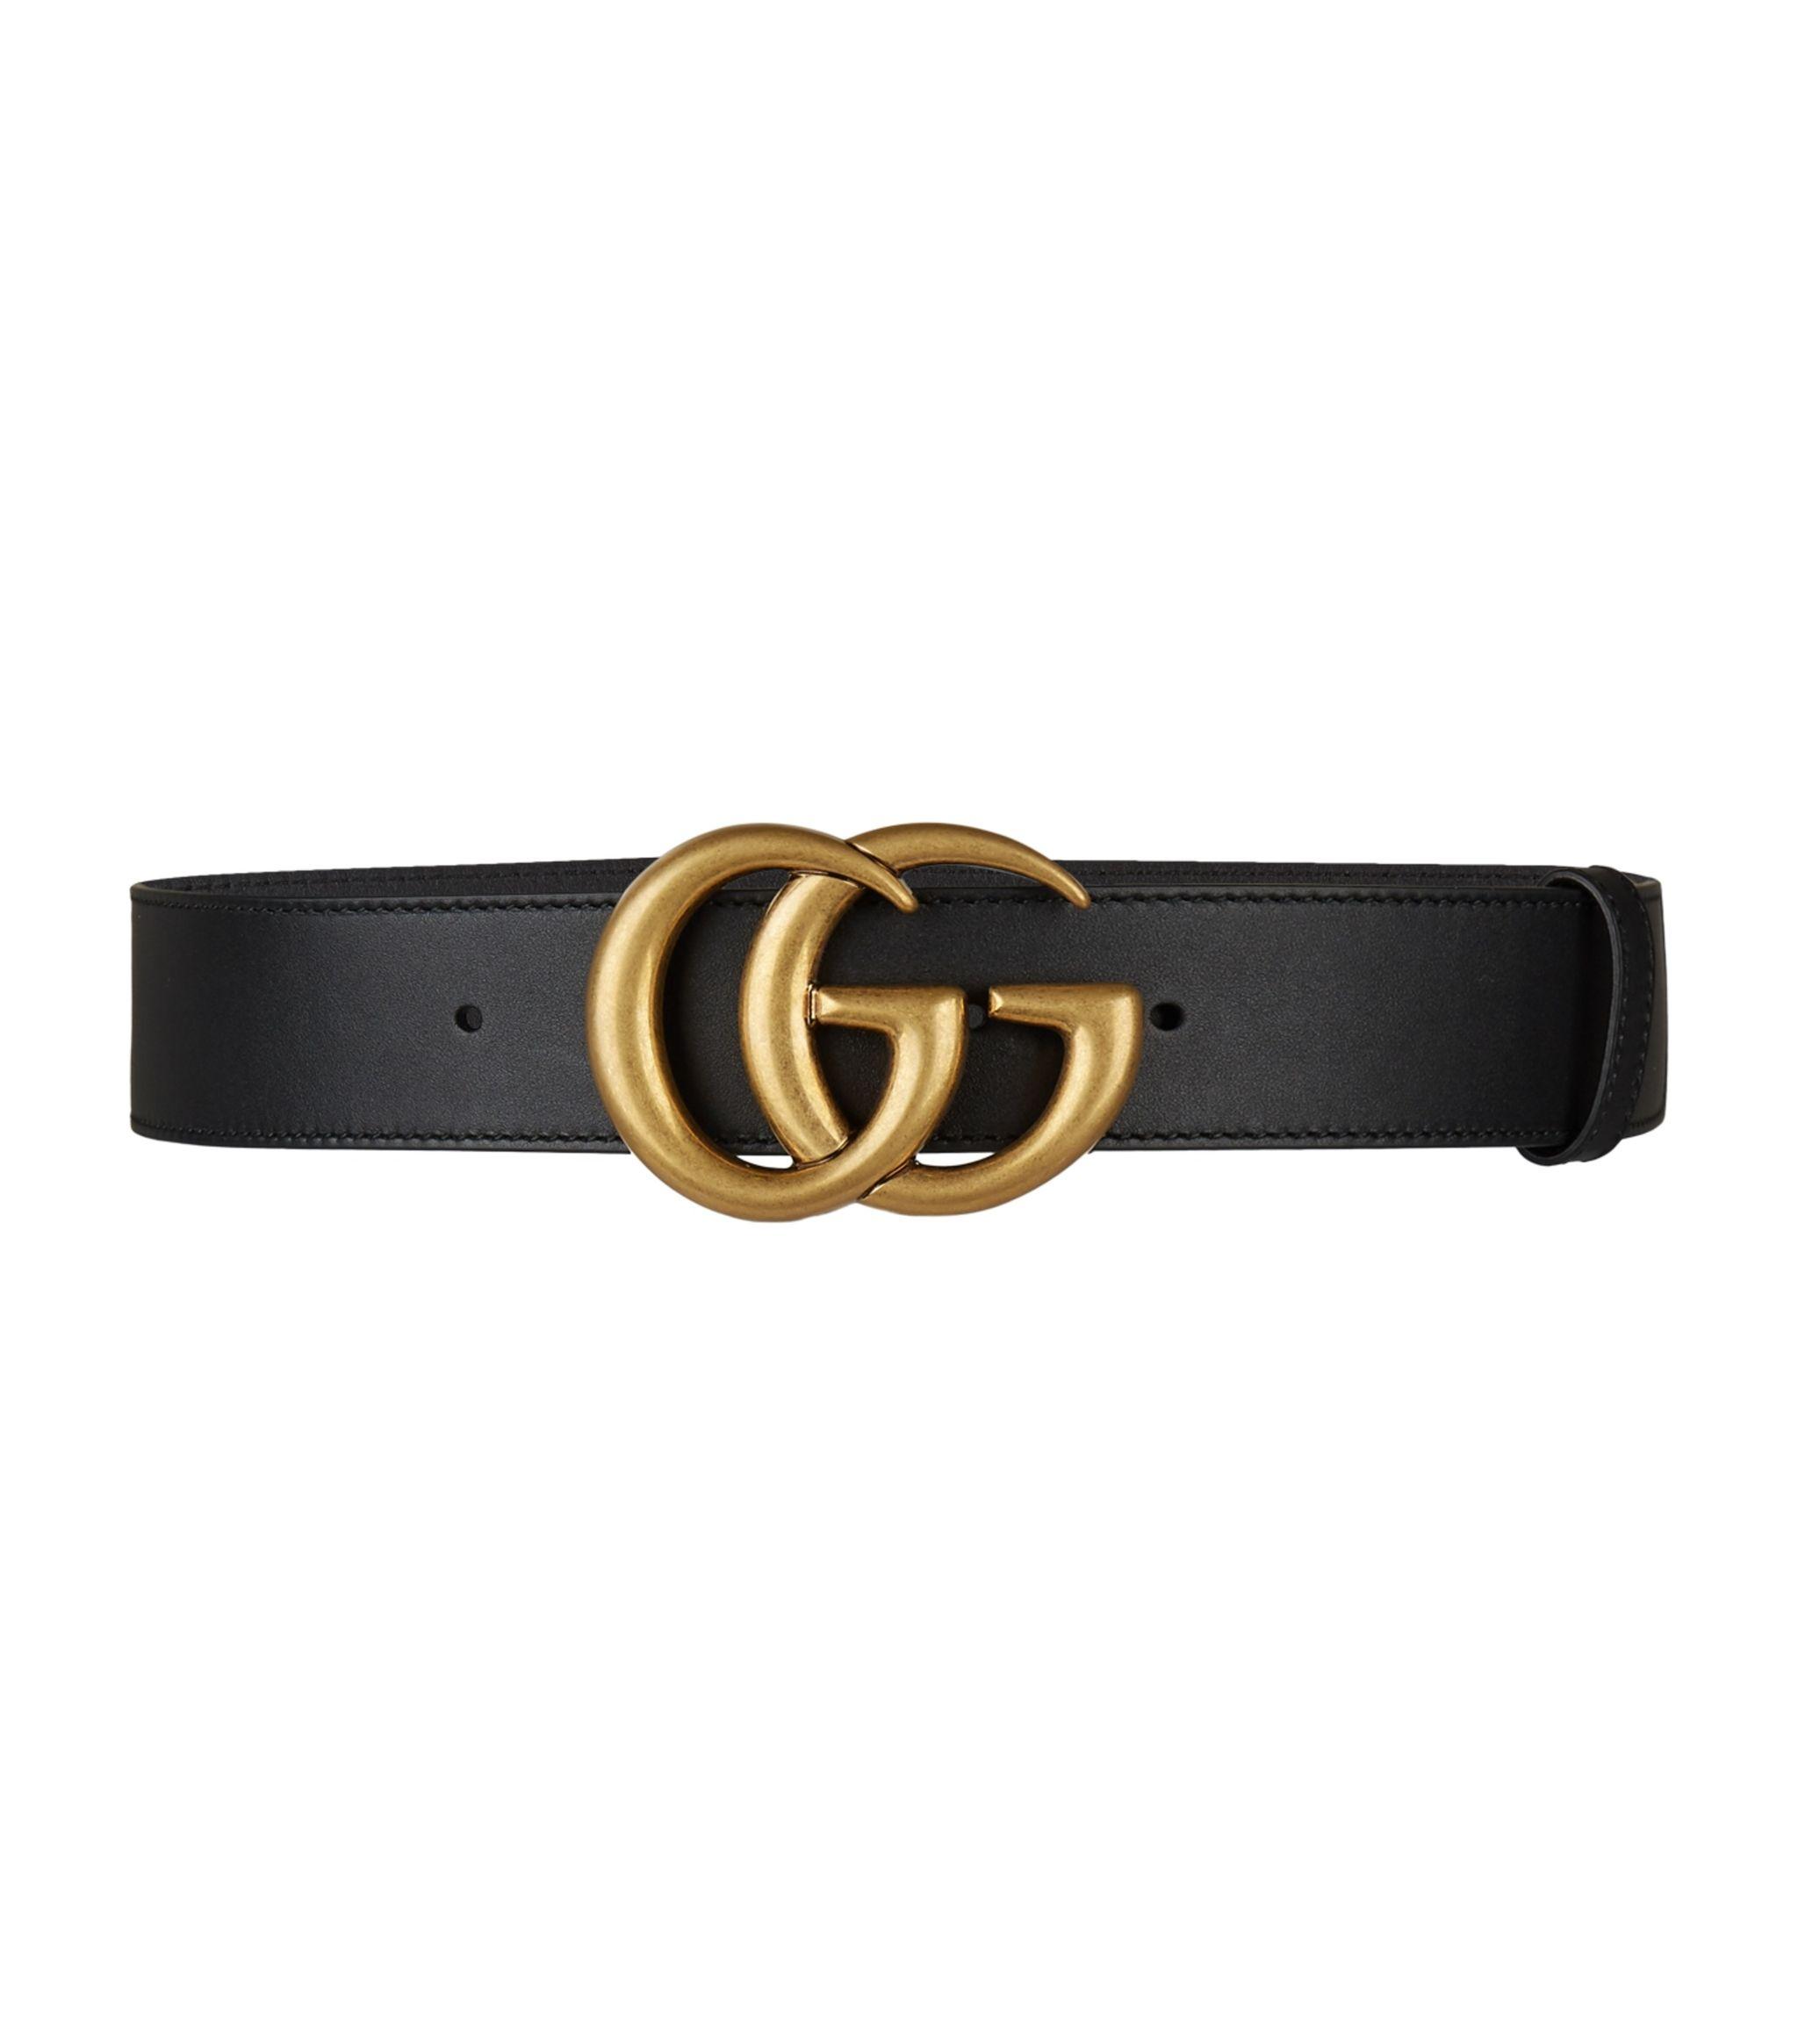 Gucci Leather Marmont Belt in Black - Save 15% - Lyst